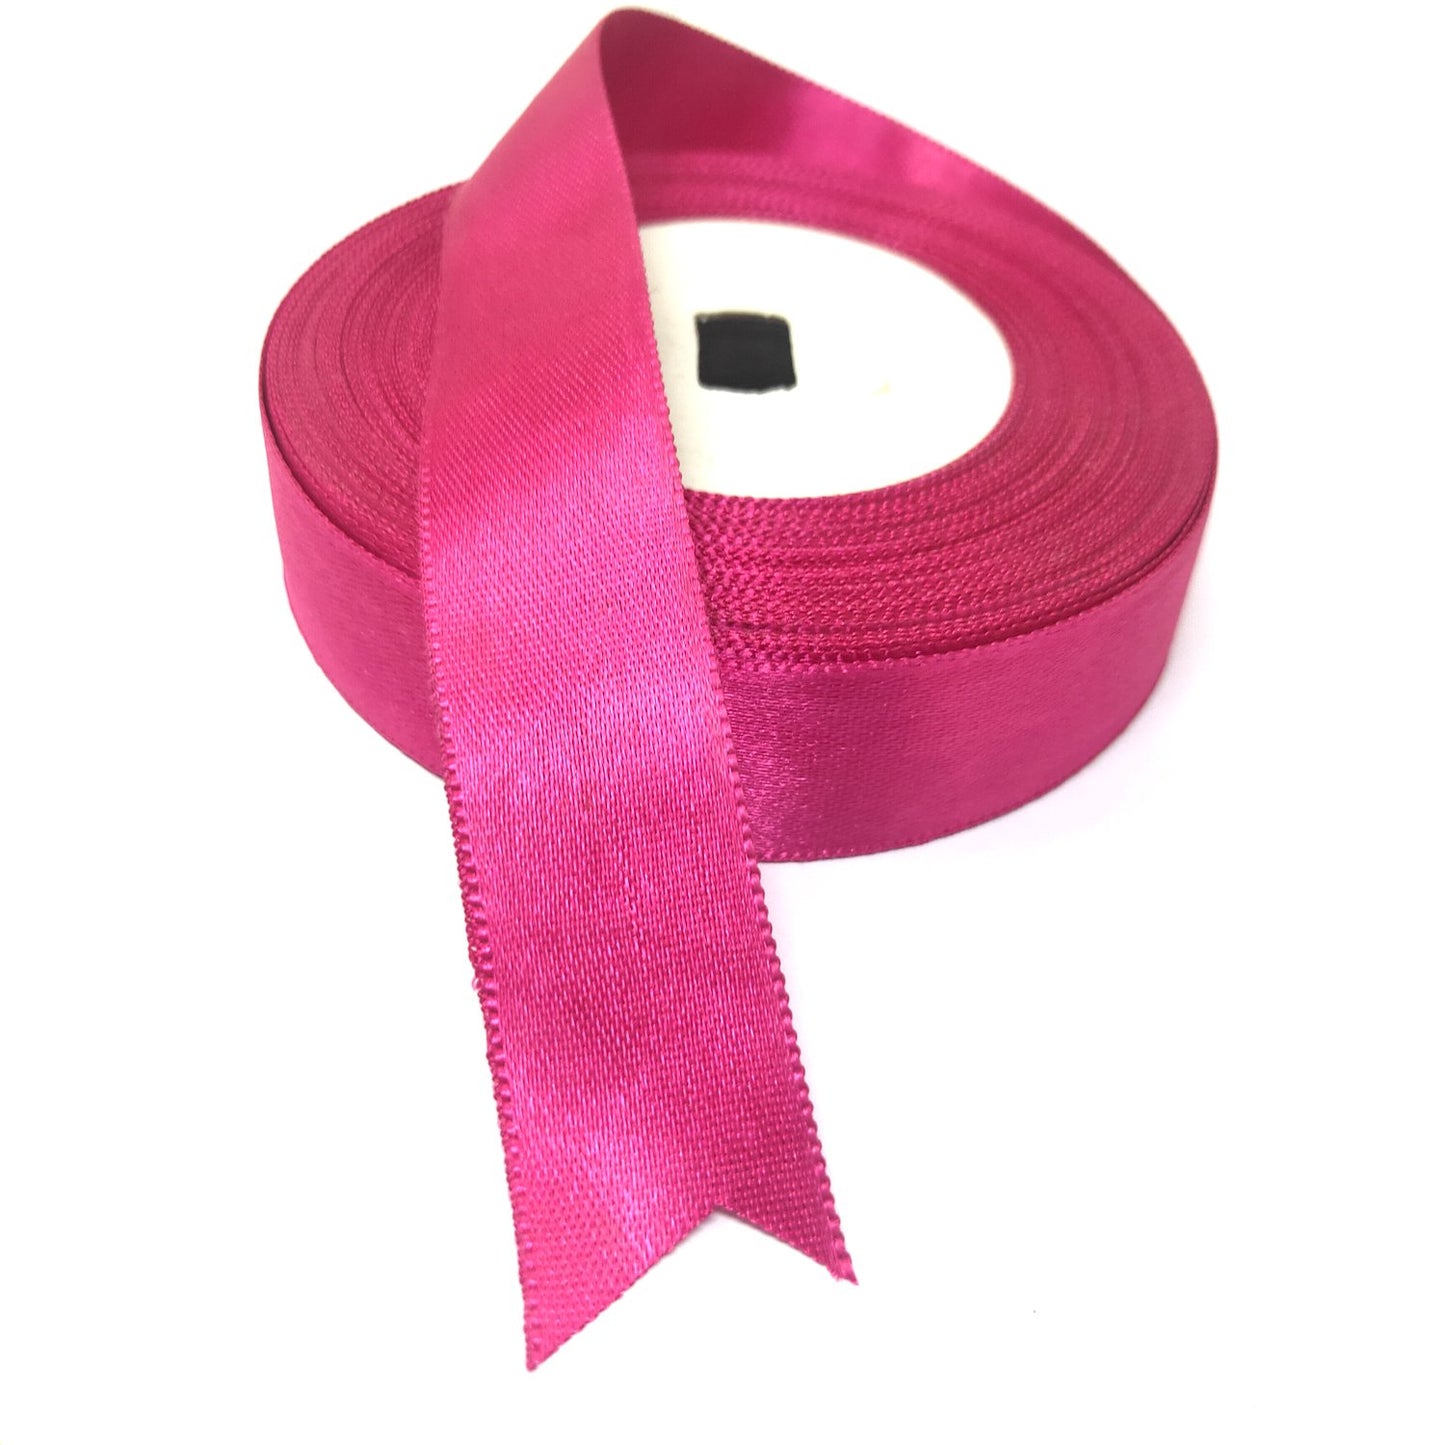 Anokhi Ada 25mm (One inch) Pink Double Side Satin Ribbon (5 meter, Ribbon-062)